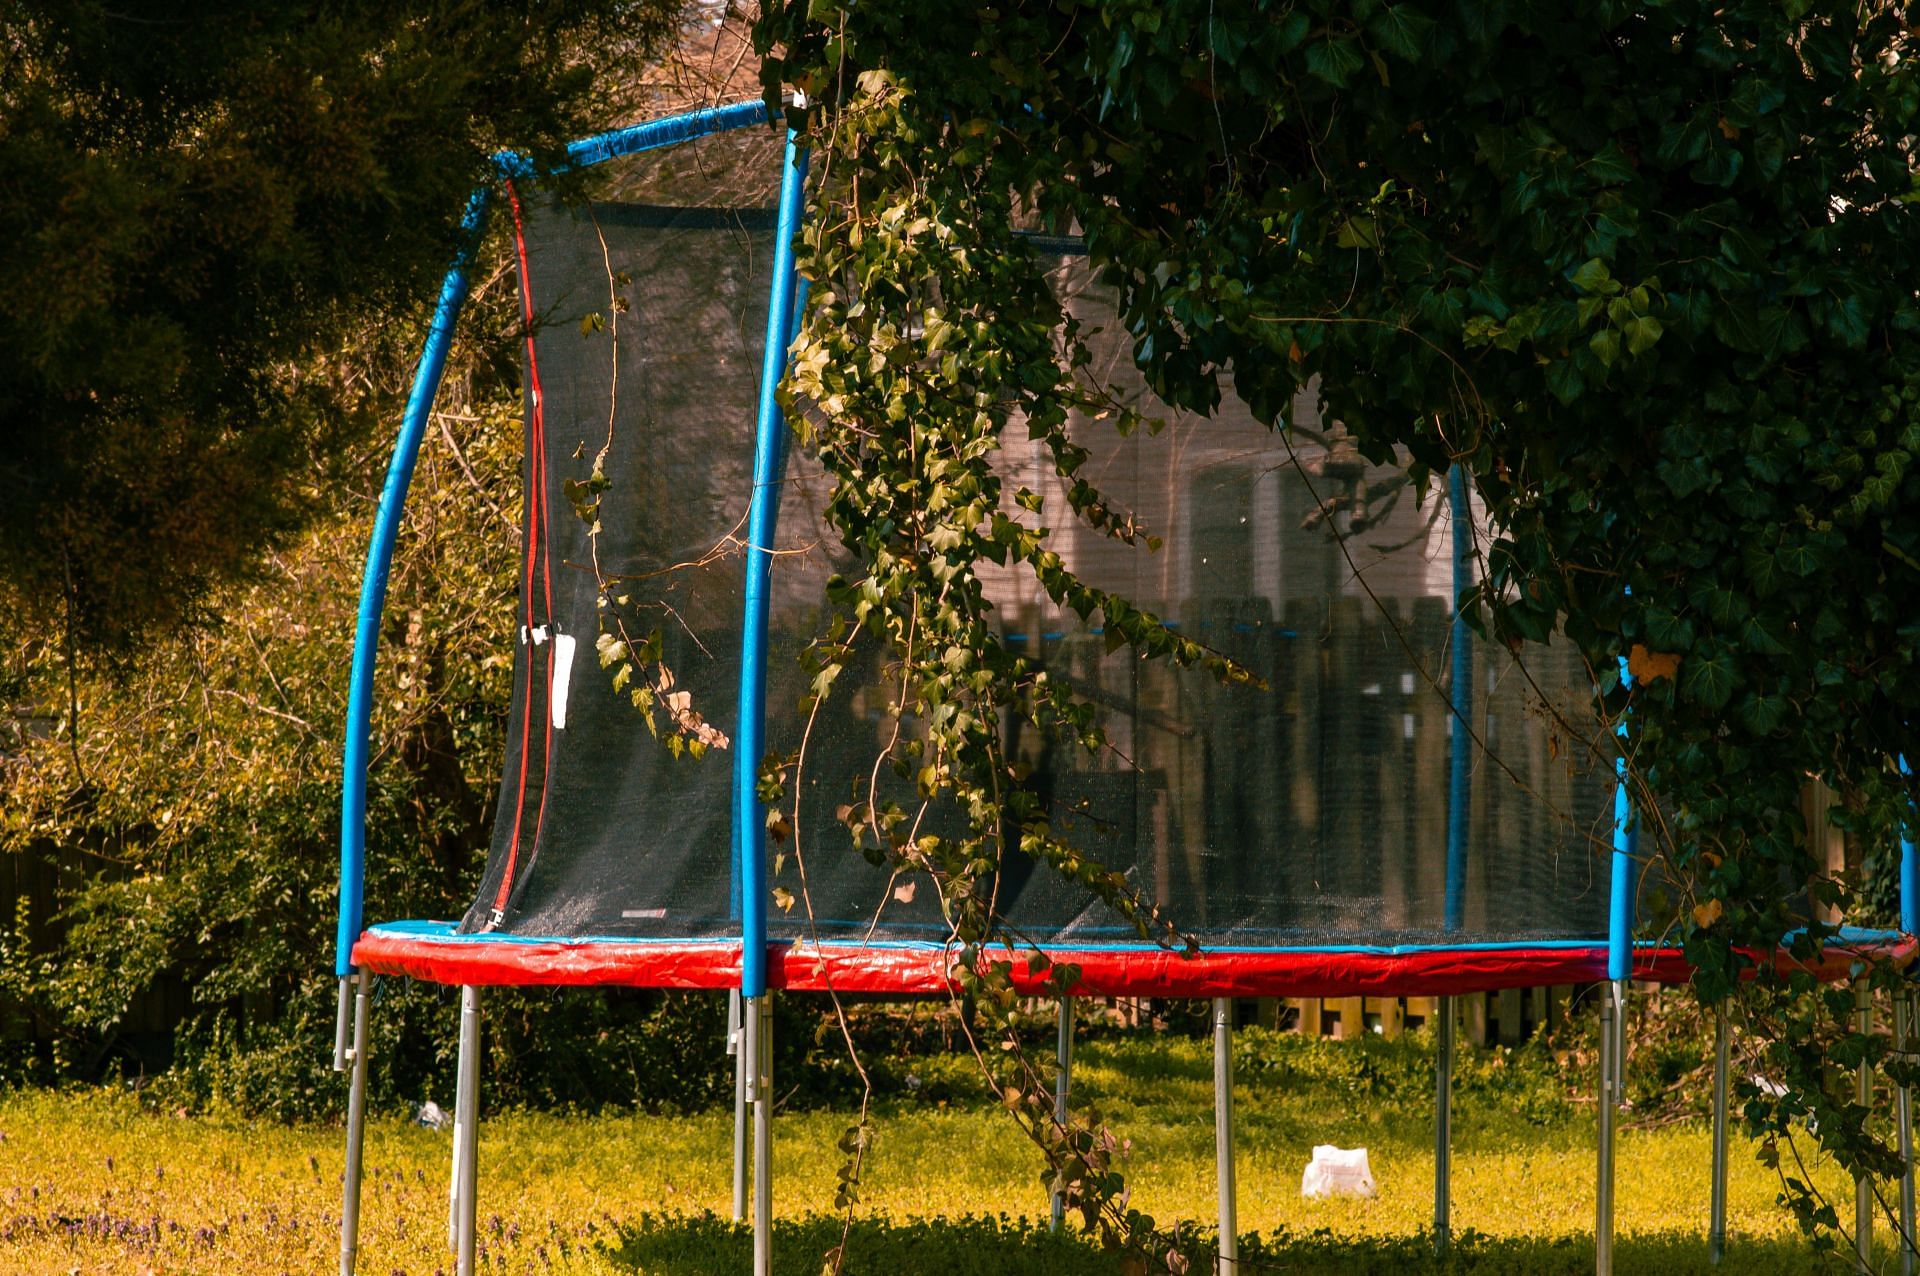 Jumping on a trampoline helps burn more calories. (Image via Unsplash/Shay )